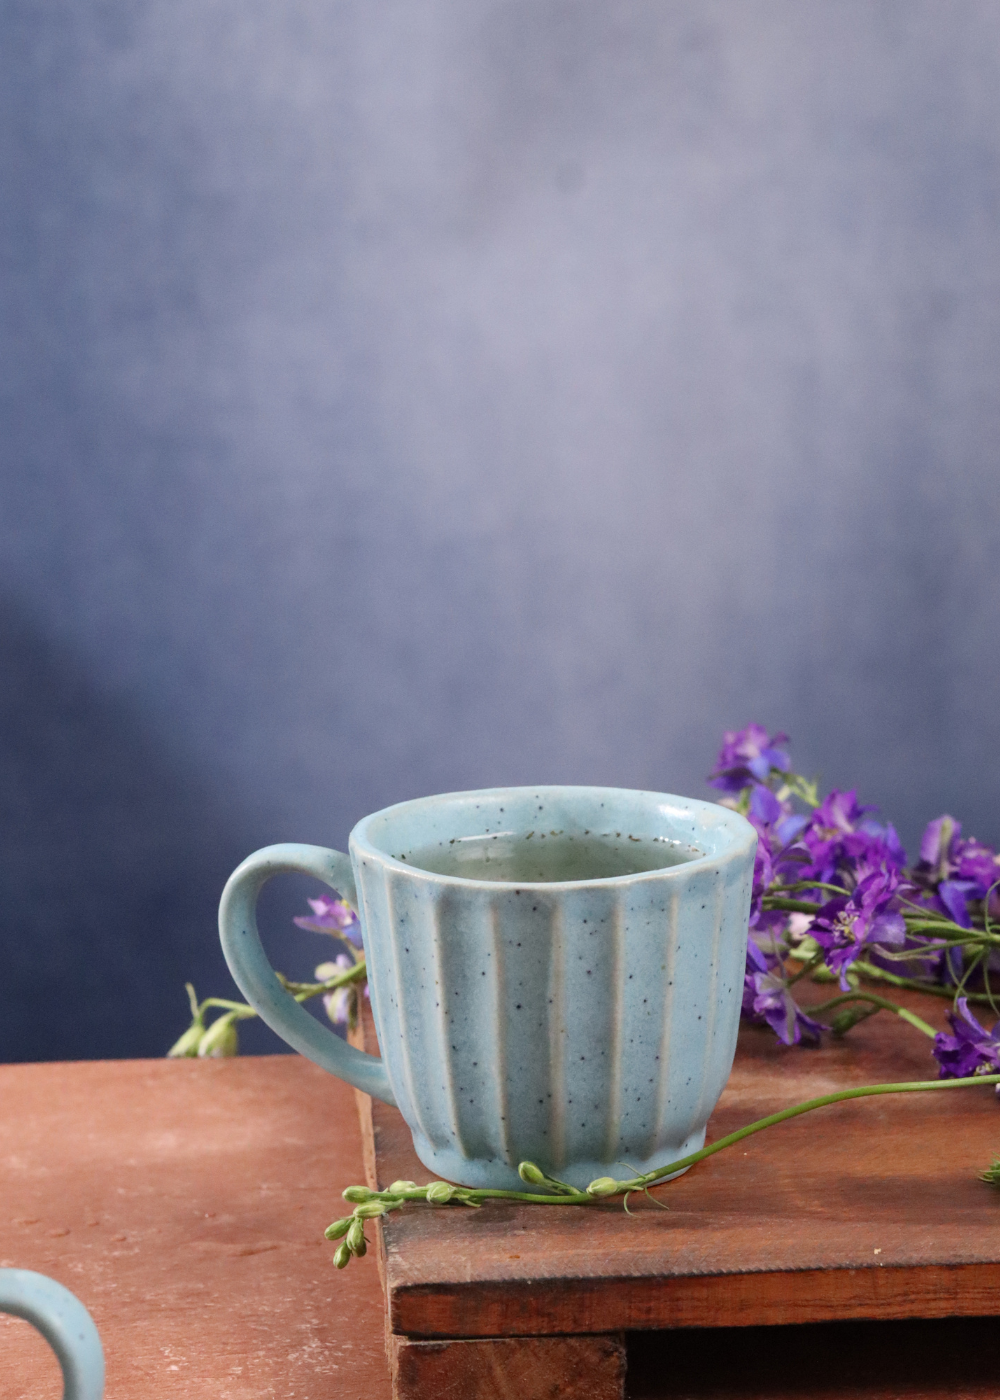 Sky blue chai cup with tea on a wooden surface